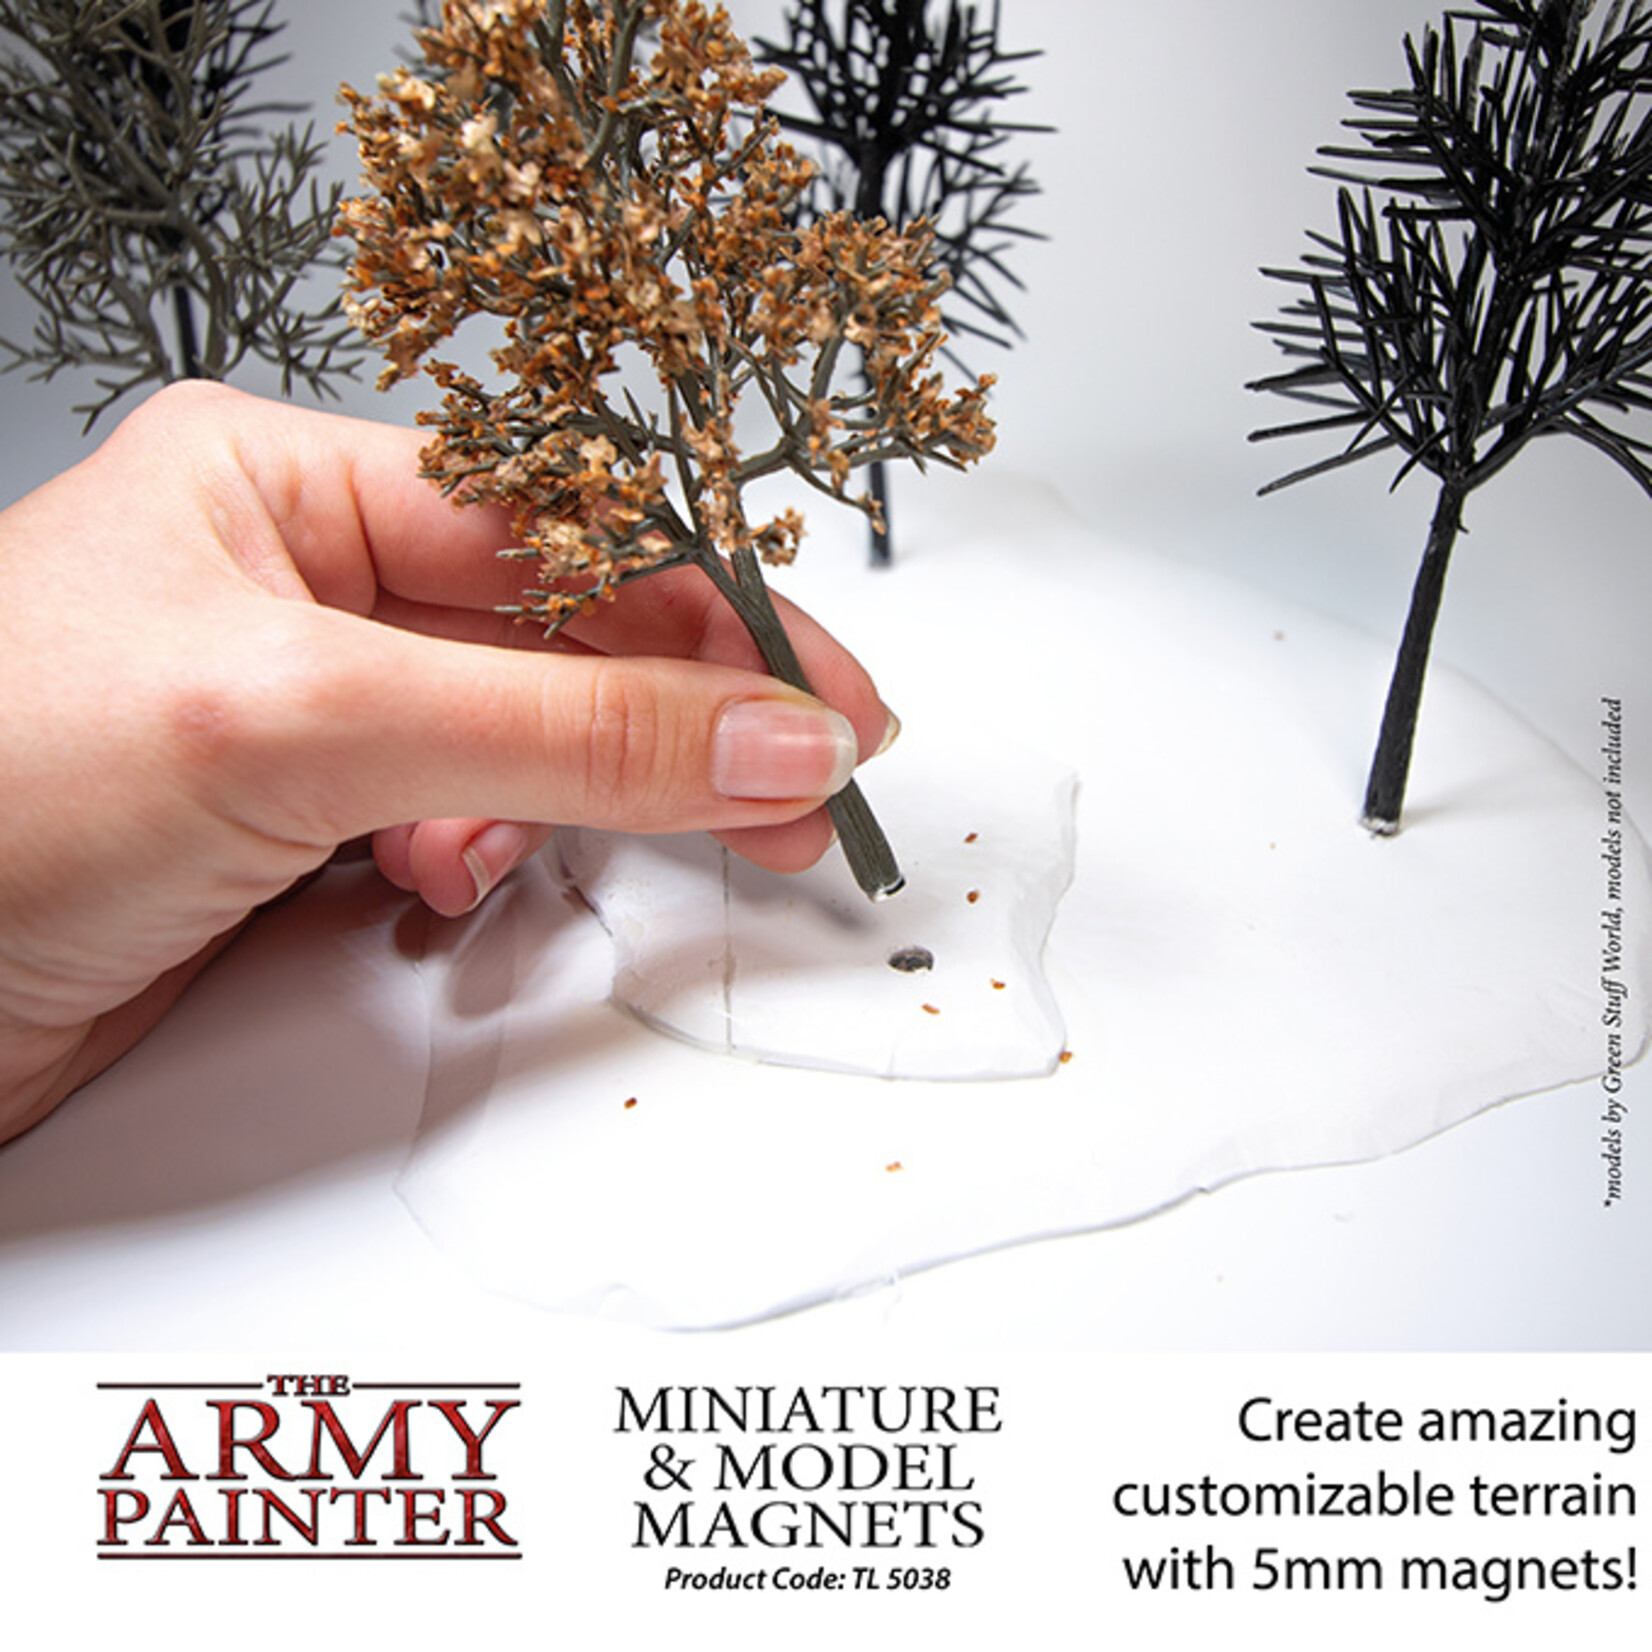 The Army Painter The Army Painter Miniature & Model Magnets (3mm; 5mm)